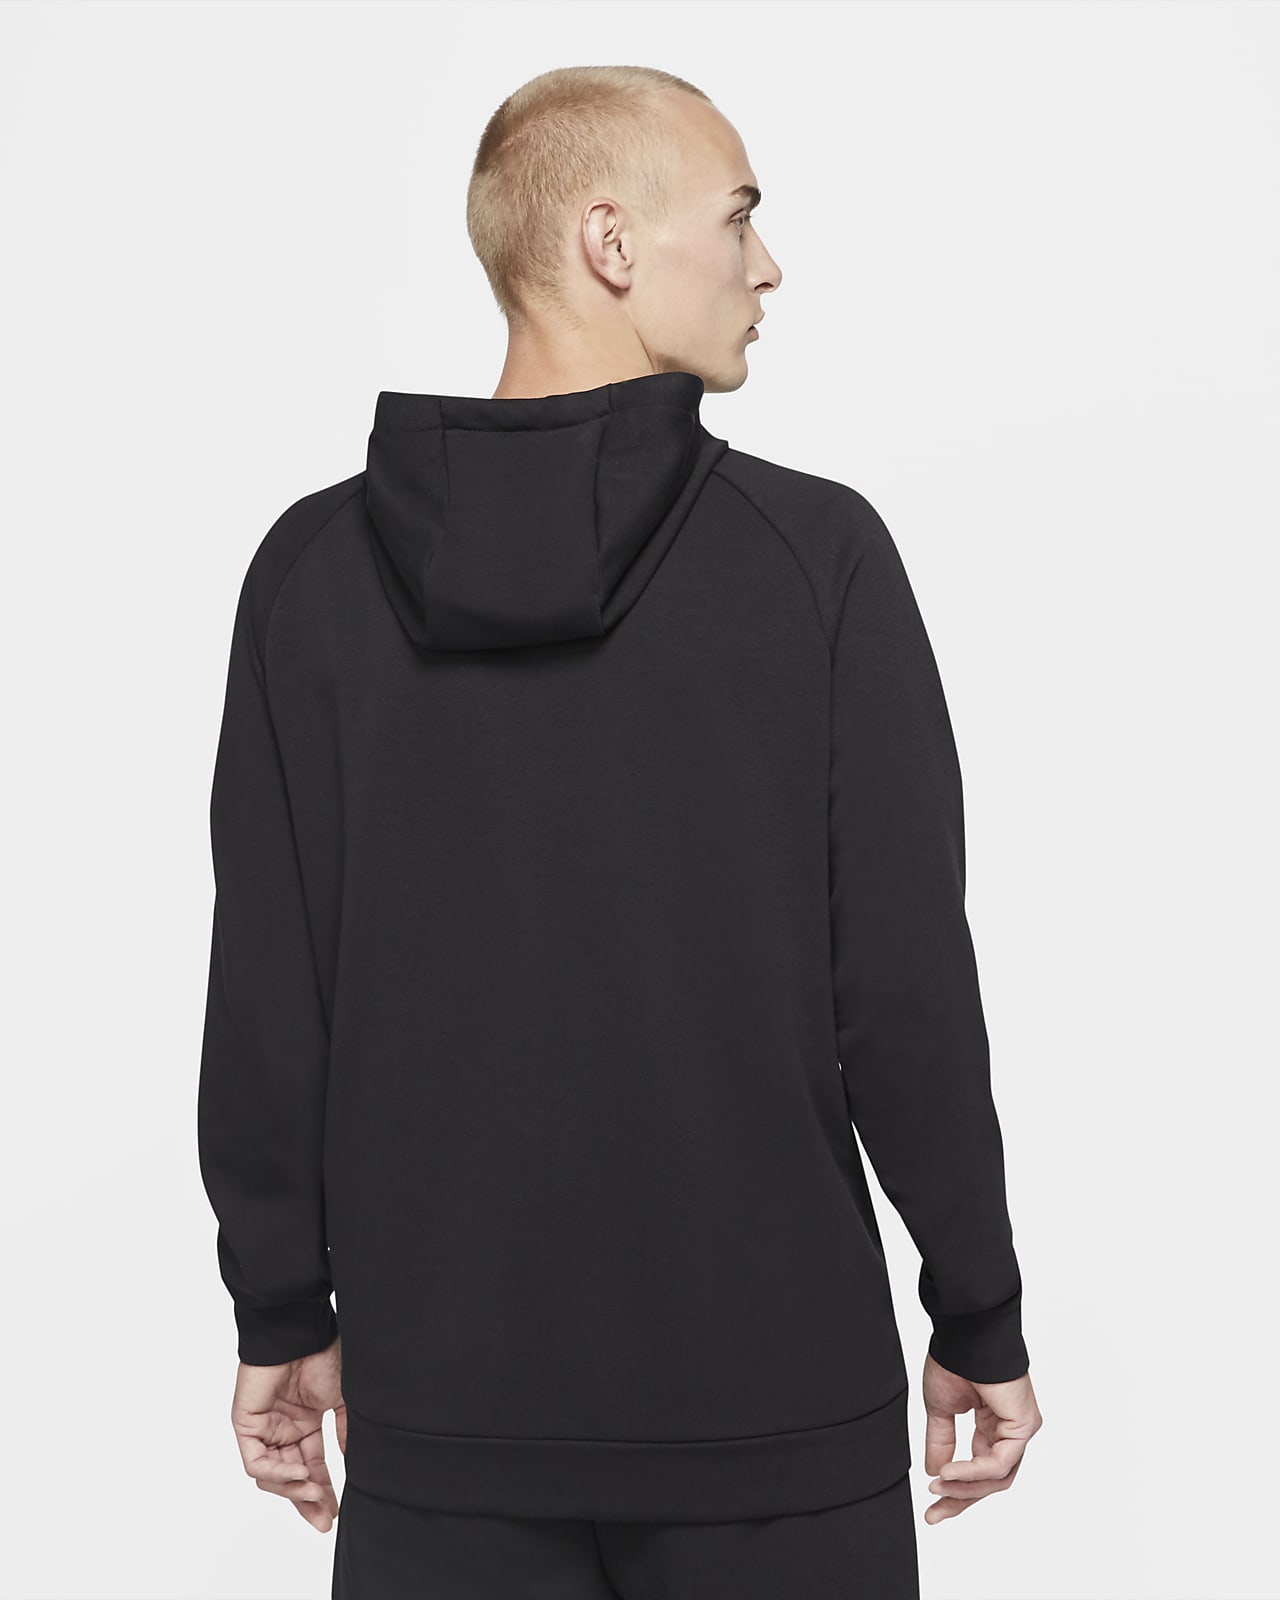 Dry Graphic Men's Dri-FIT Hooded Fitness Nike.com